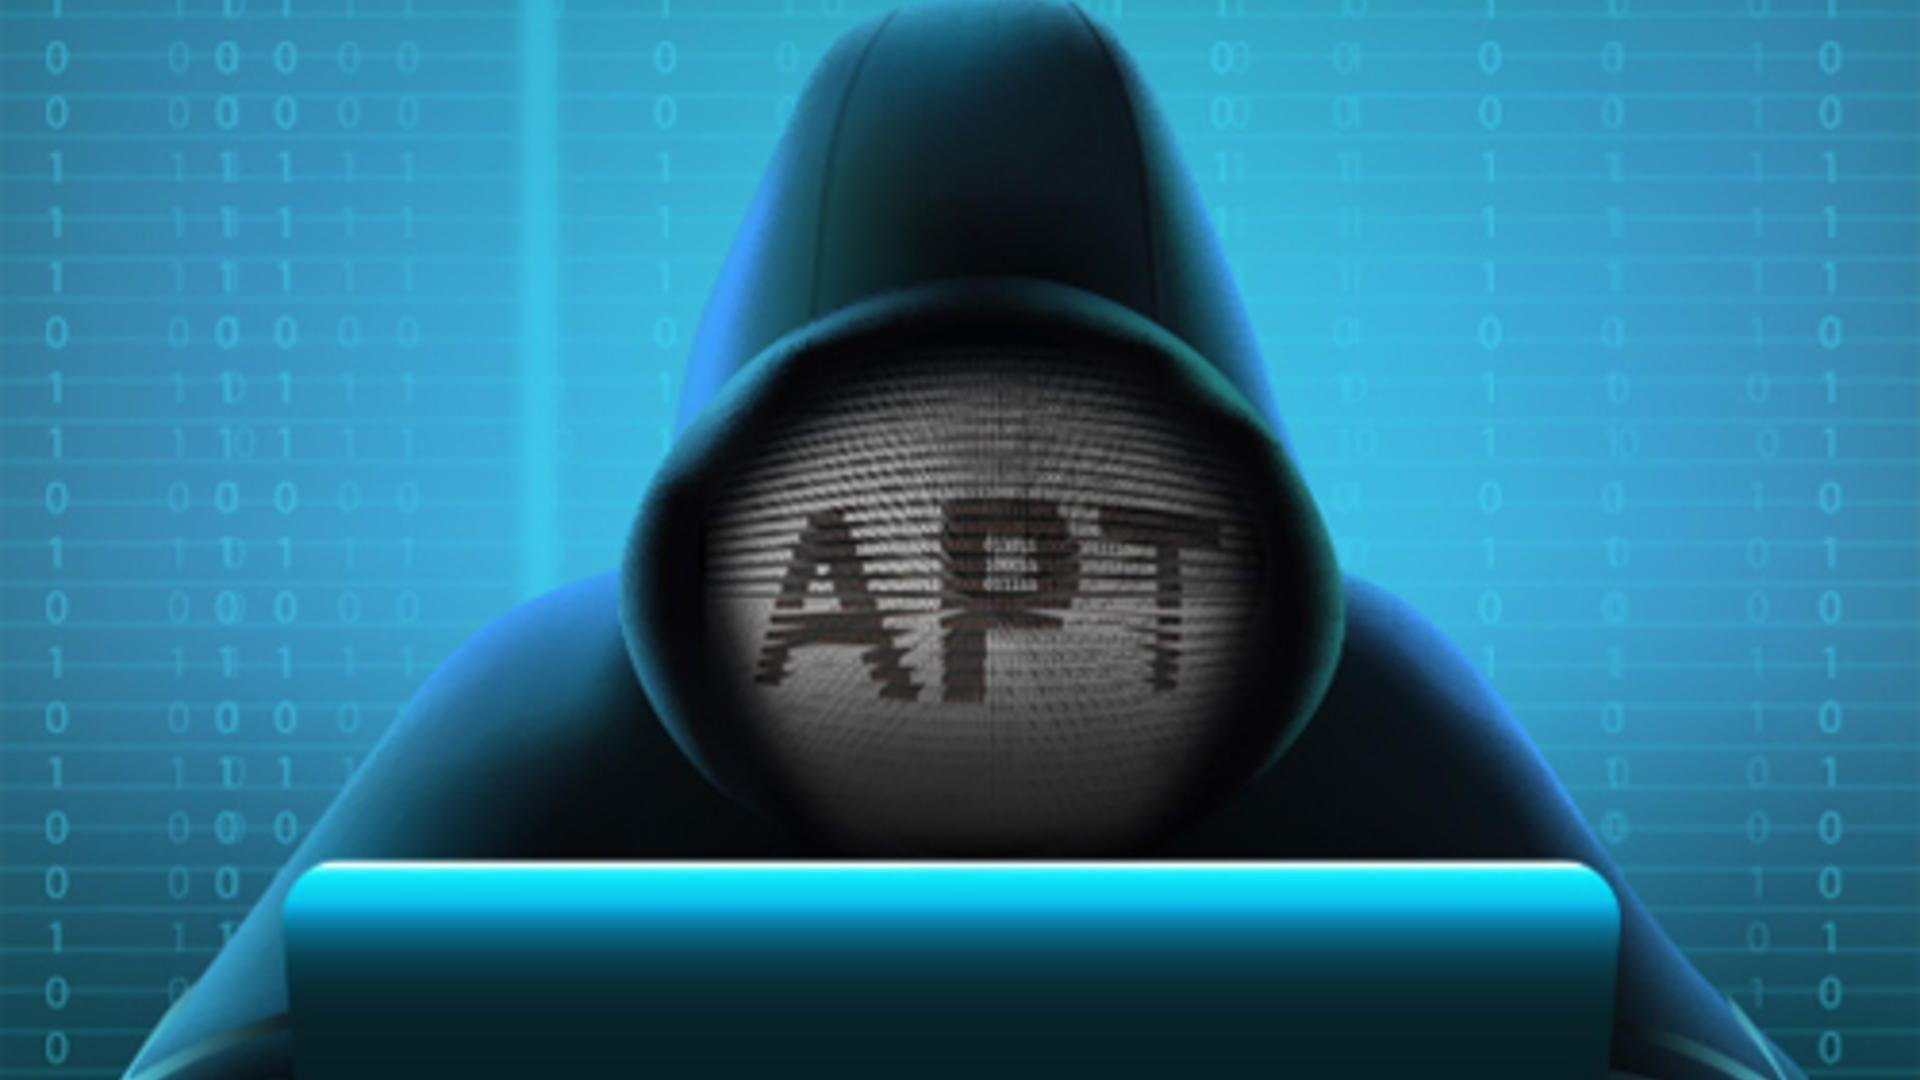 Things to know about how to prevent APT attacks